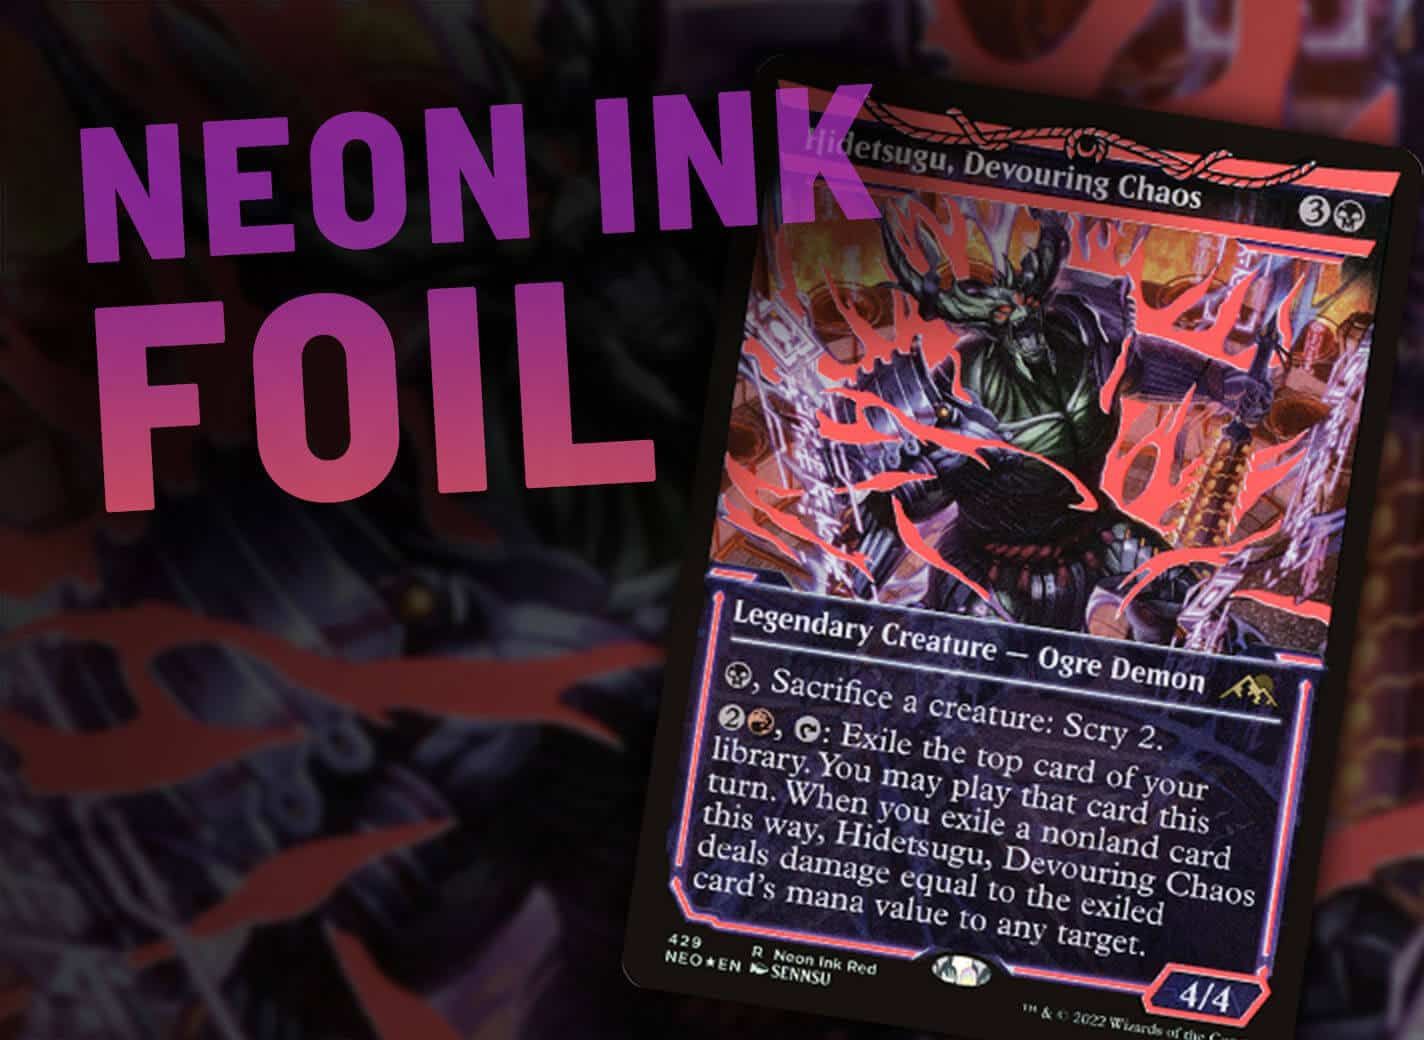 What is a Neon Ink Foil in Magic: The Gathering?